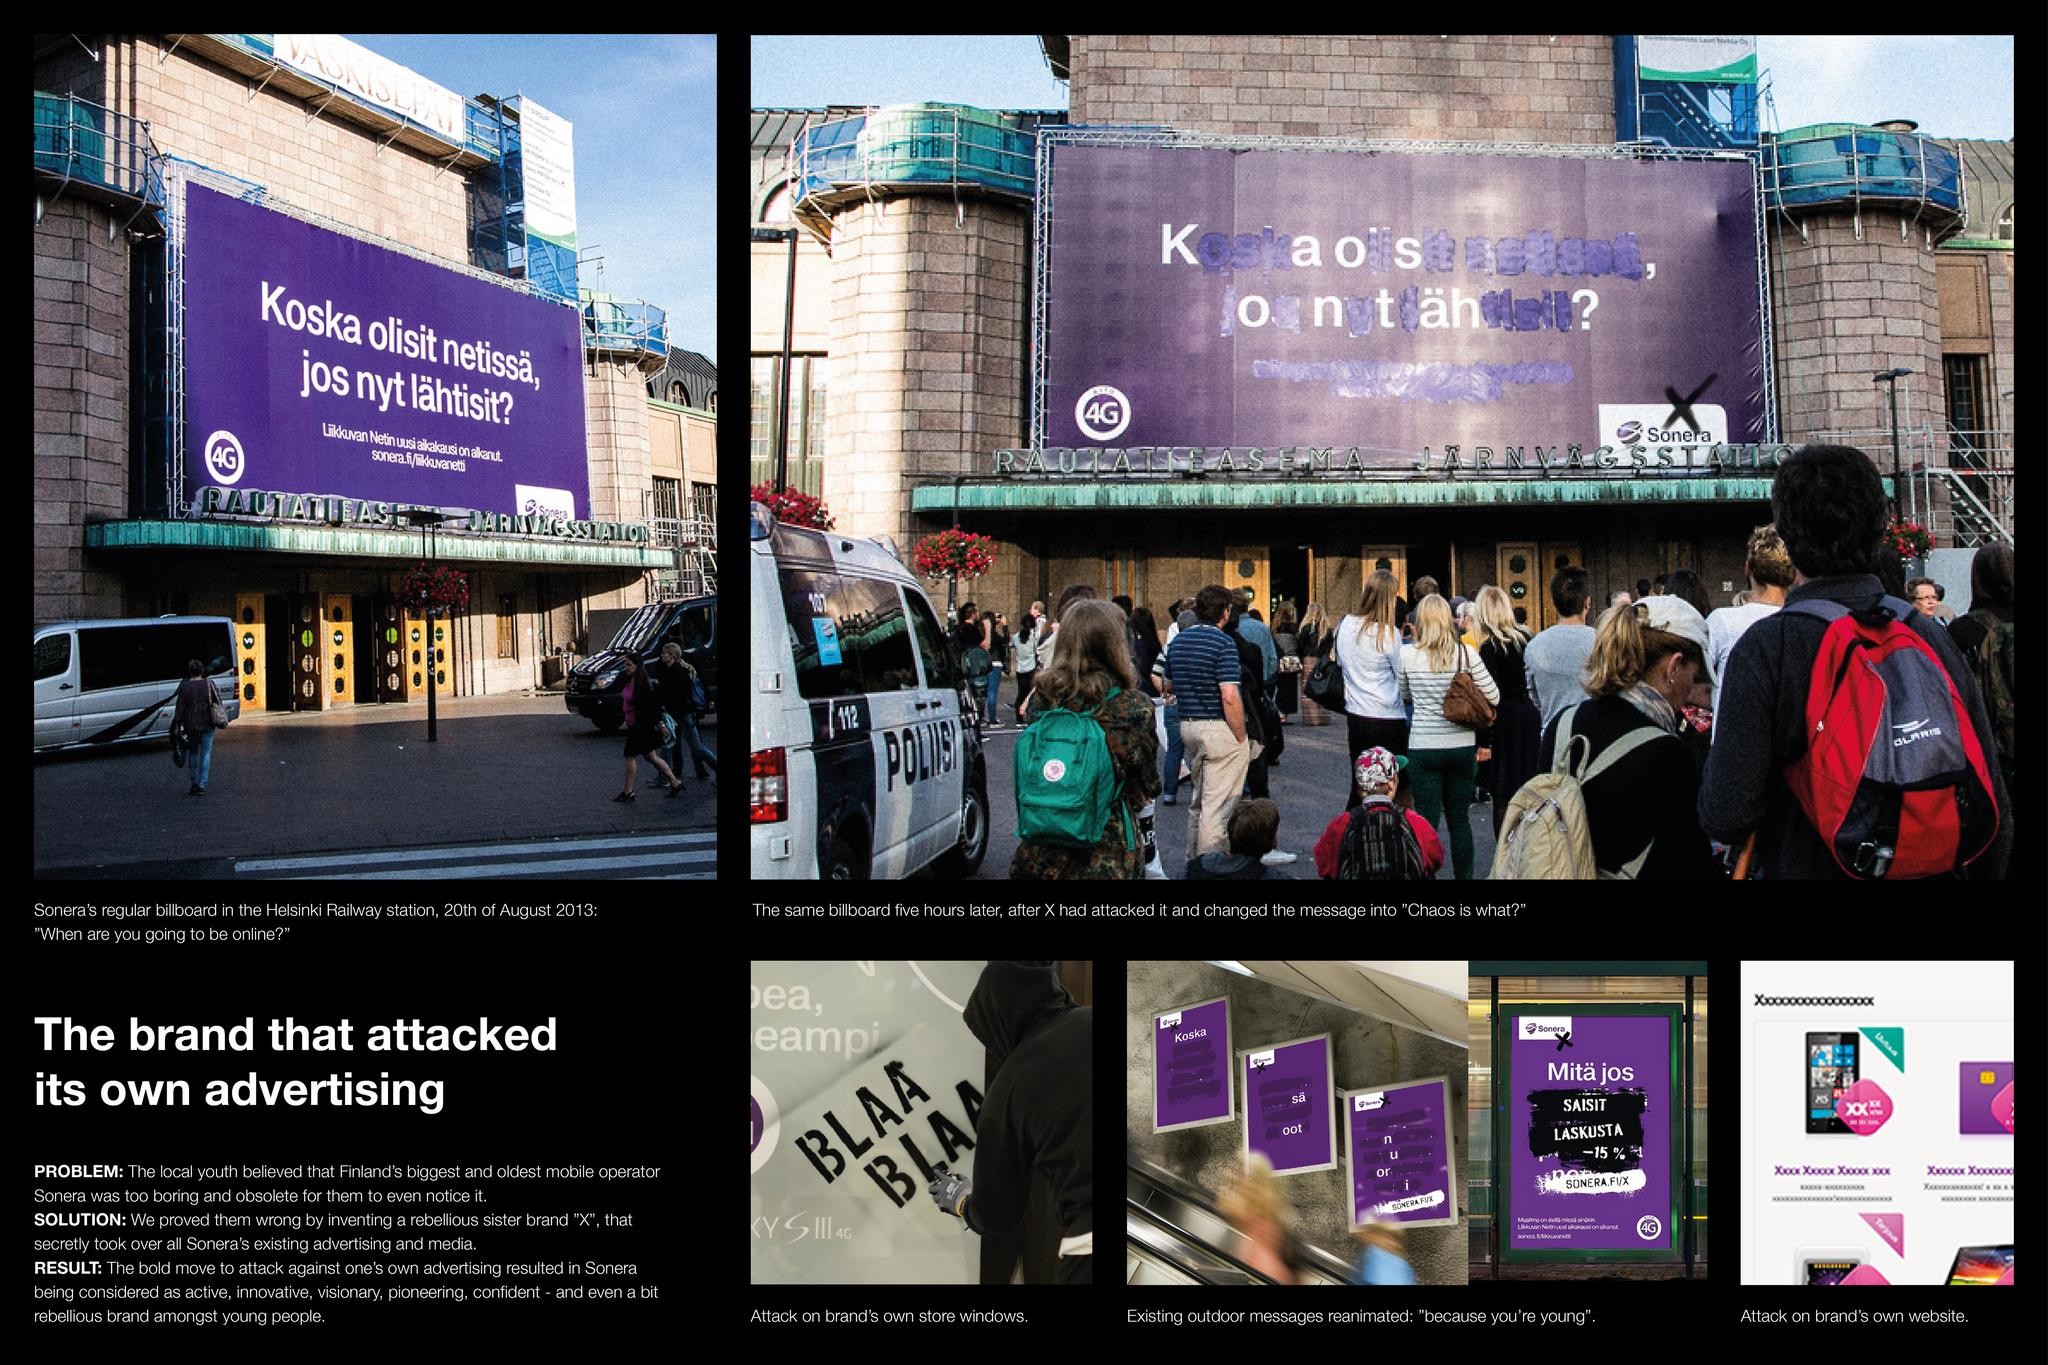 X ATTACK – THE BRAND THAT ATTACKED ITS OWN ADVERTISING